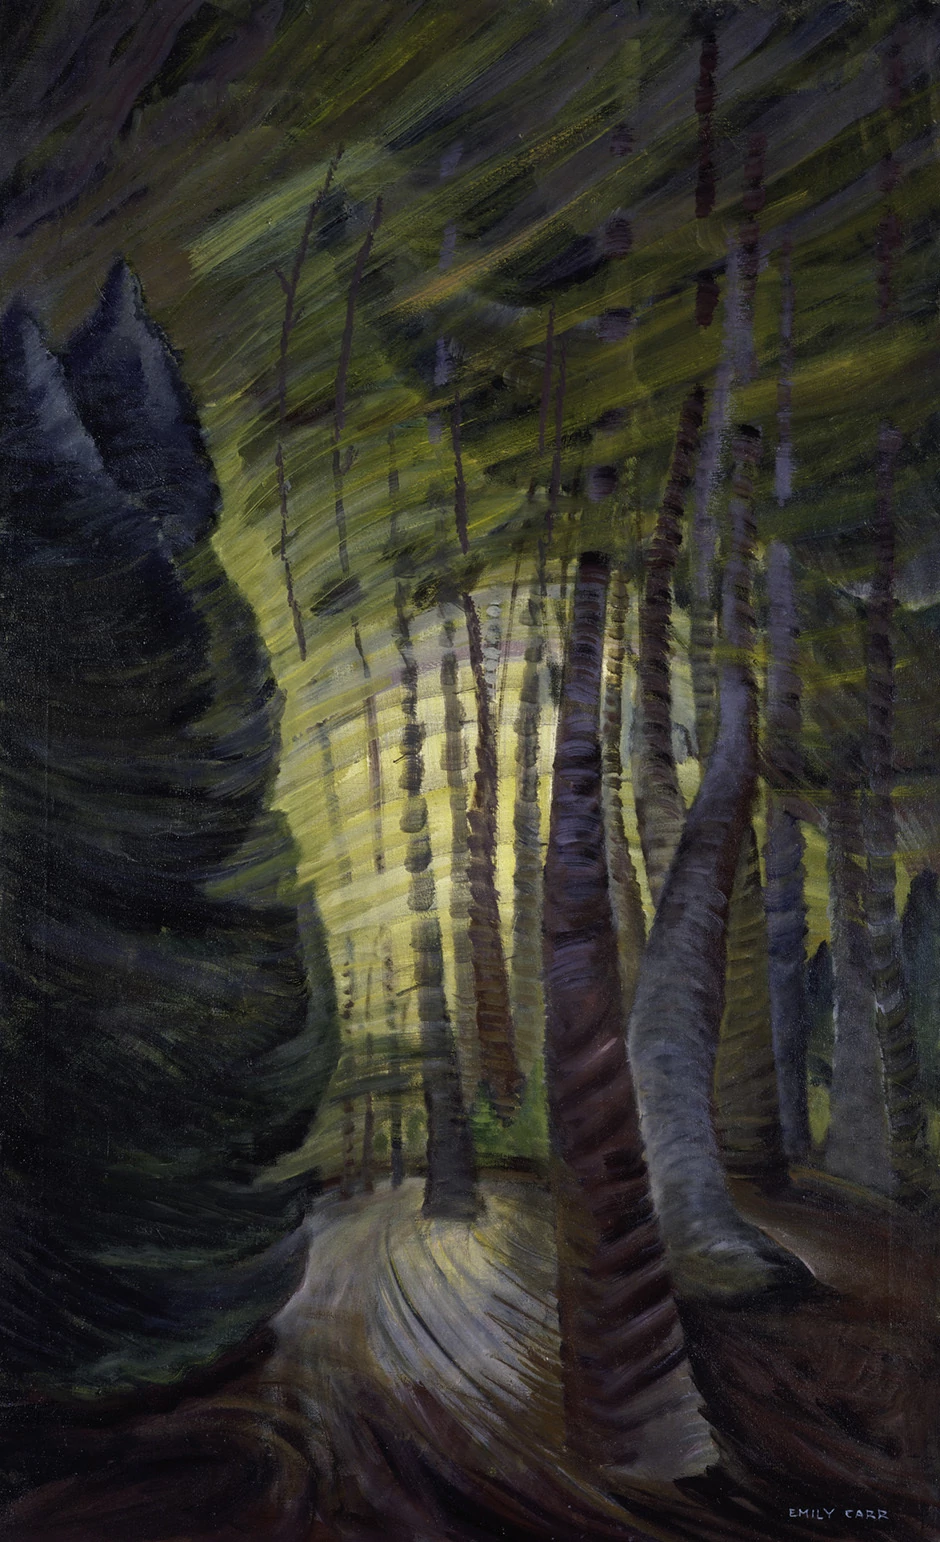 Sombreness Sunlit, Emily Carr